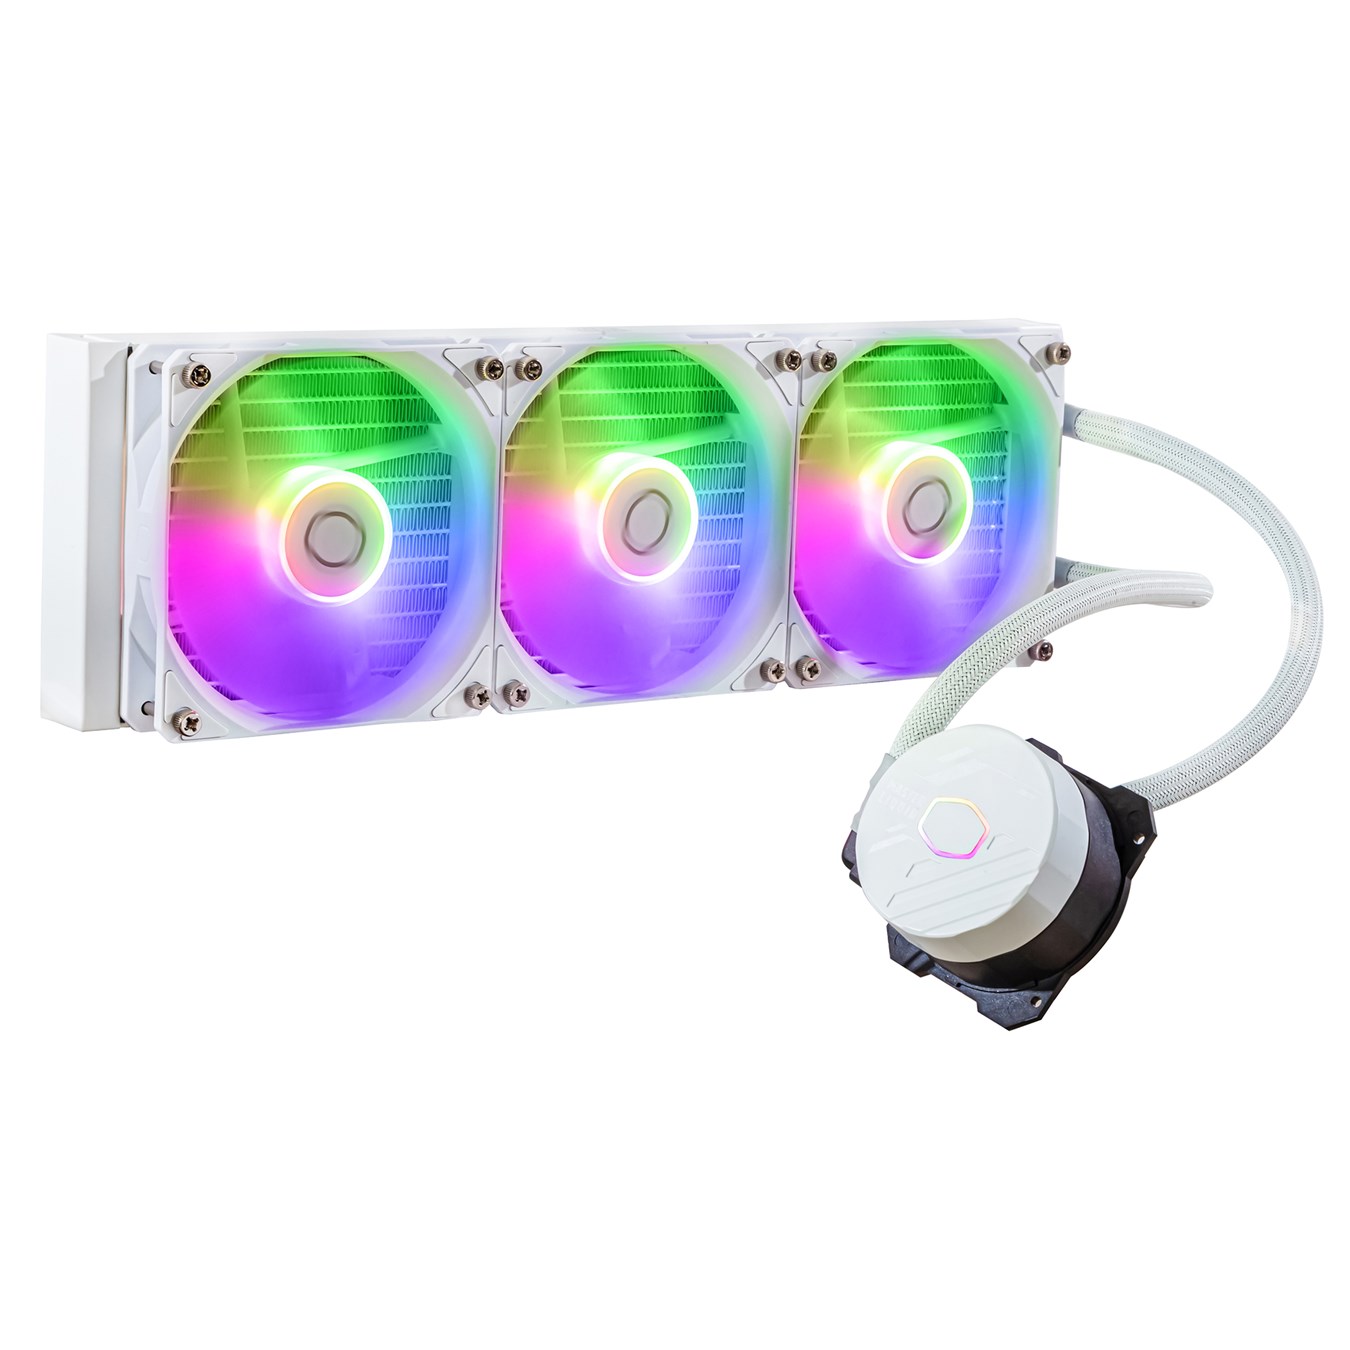 MasterLiquid 360L Core ARGB White - Front view at right 45 degree angle